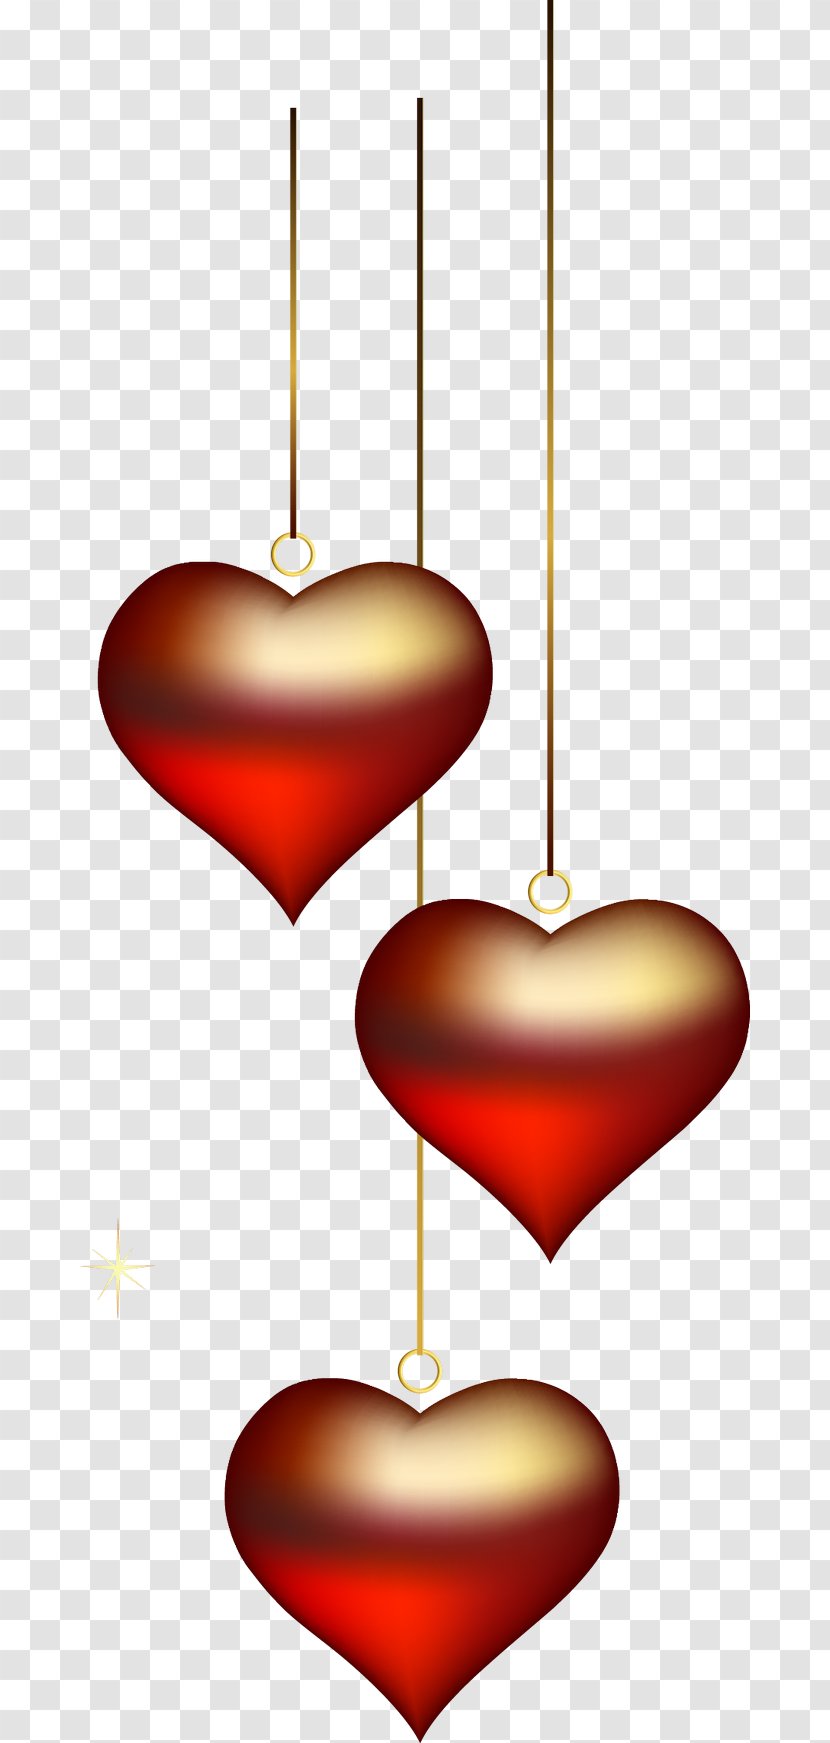 Weddings In India Clip Art - Heart - Happy Valentines Day Transparent PNG